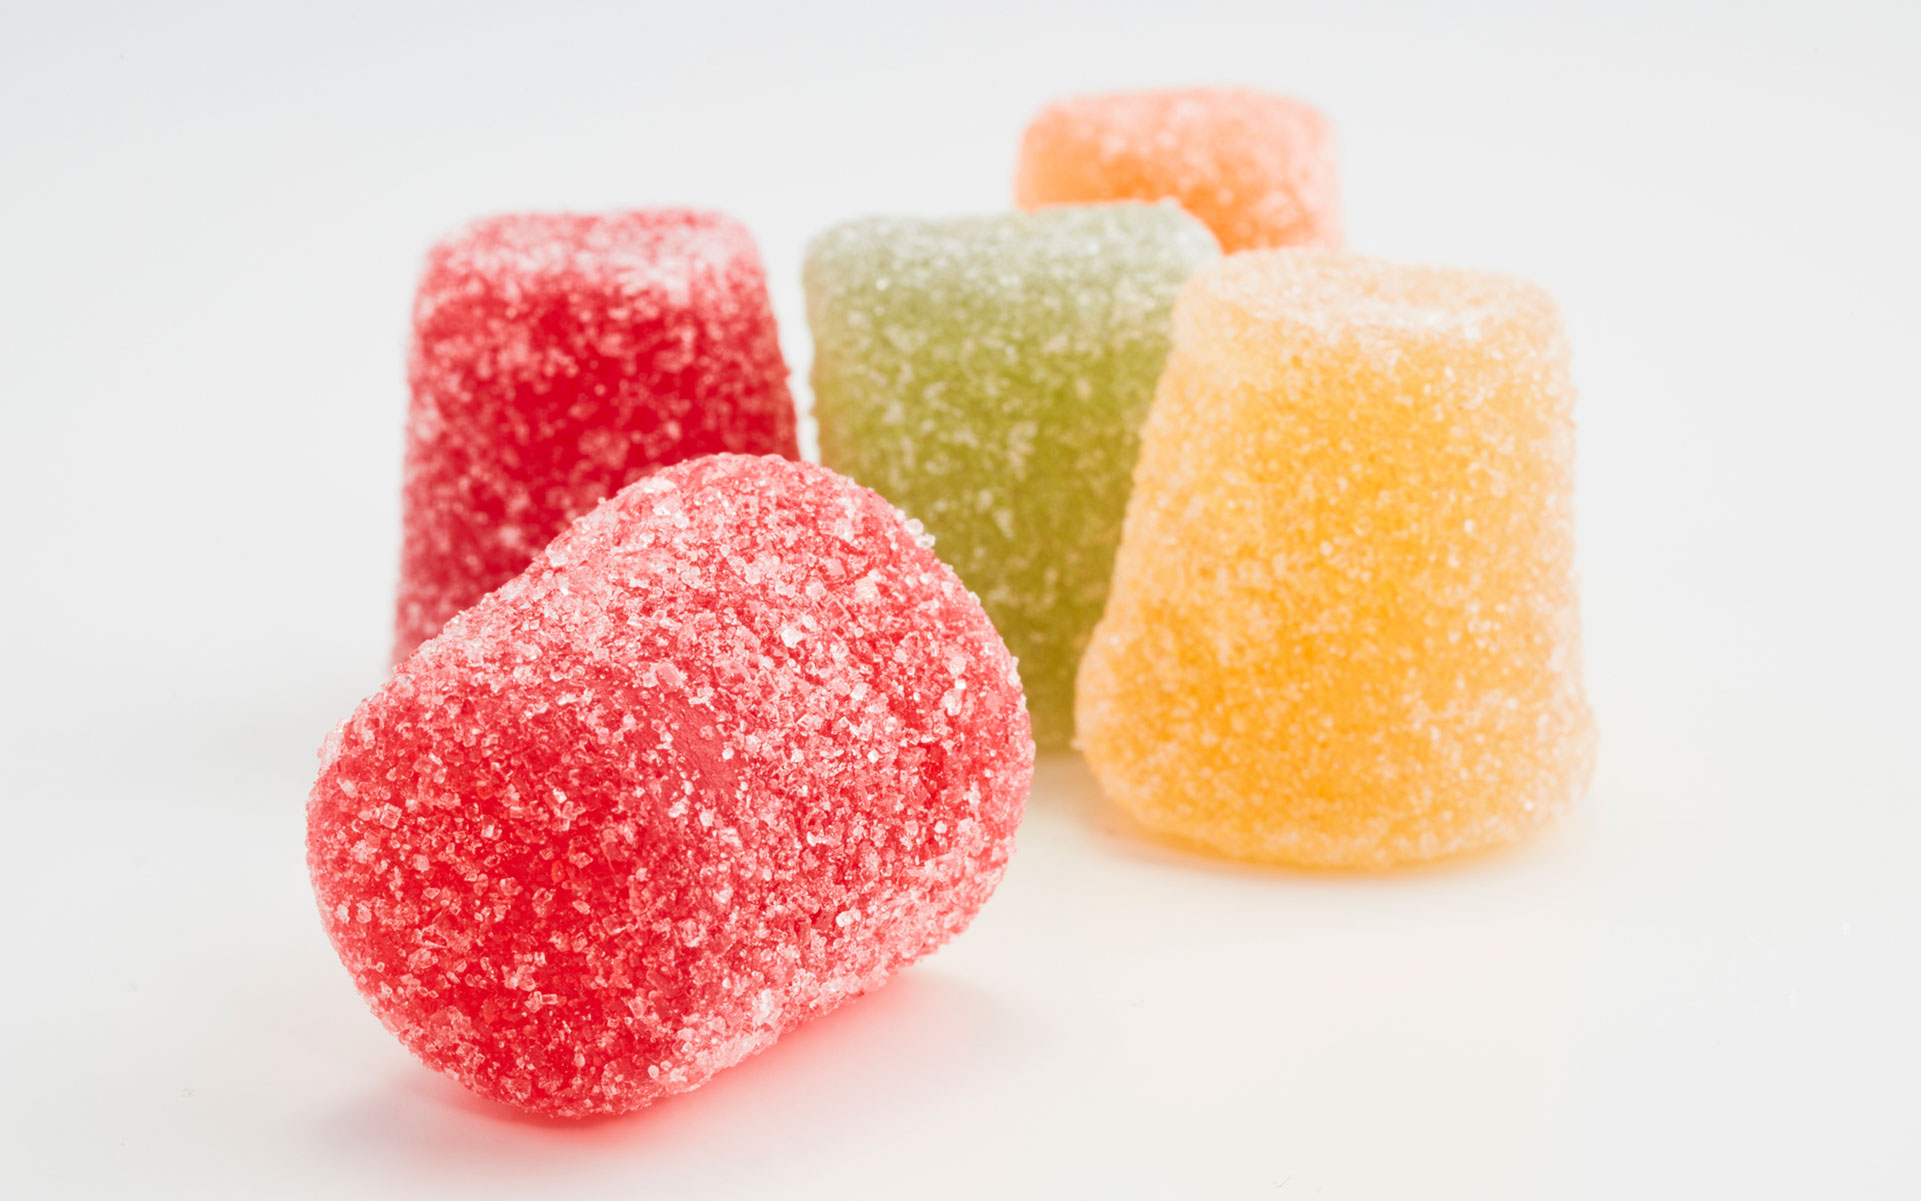 Cannabis Gummies Hard Candies To Be Pulled From Washington Shelves Leafly